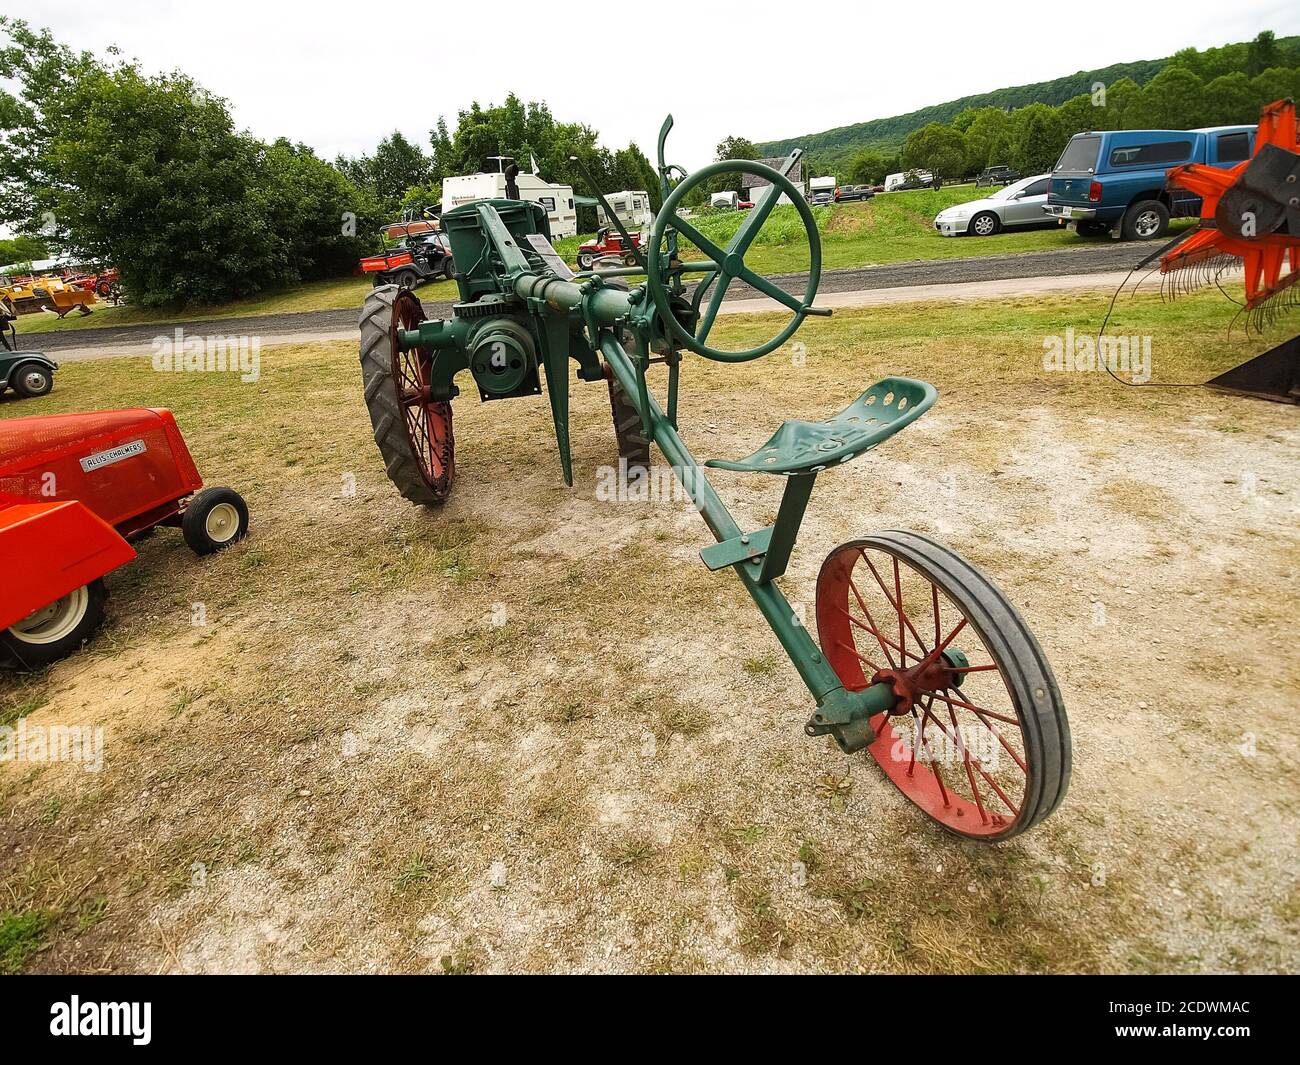 Exhibition of antique tractors. Tractor show. Agreecultural machines. Agreecultural equipment. Stock Photo